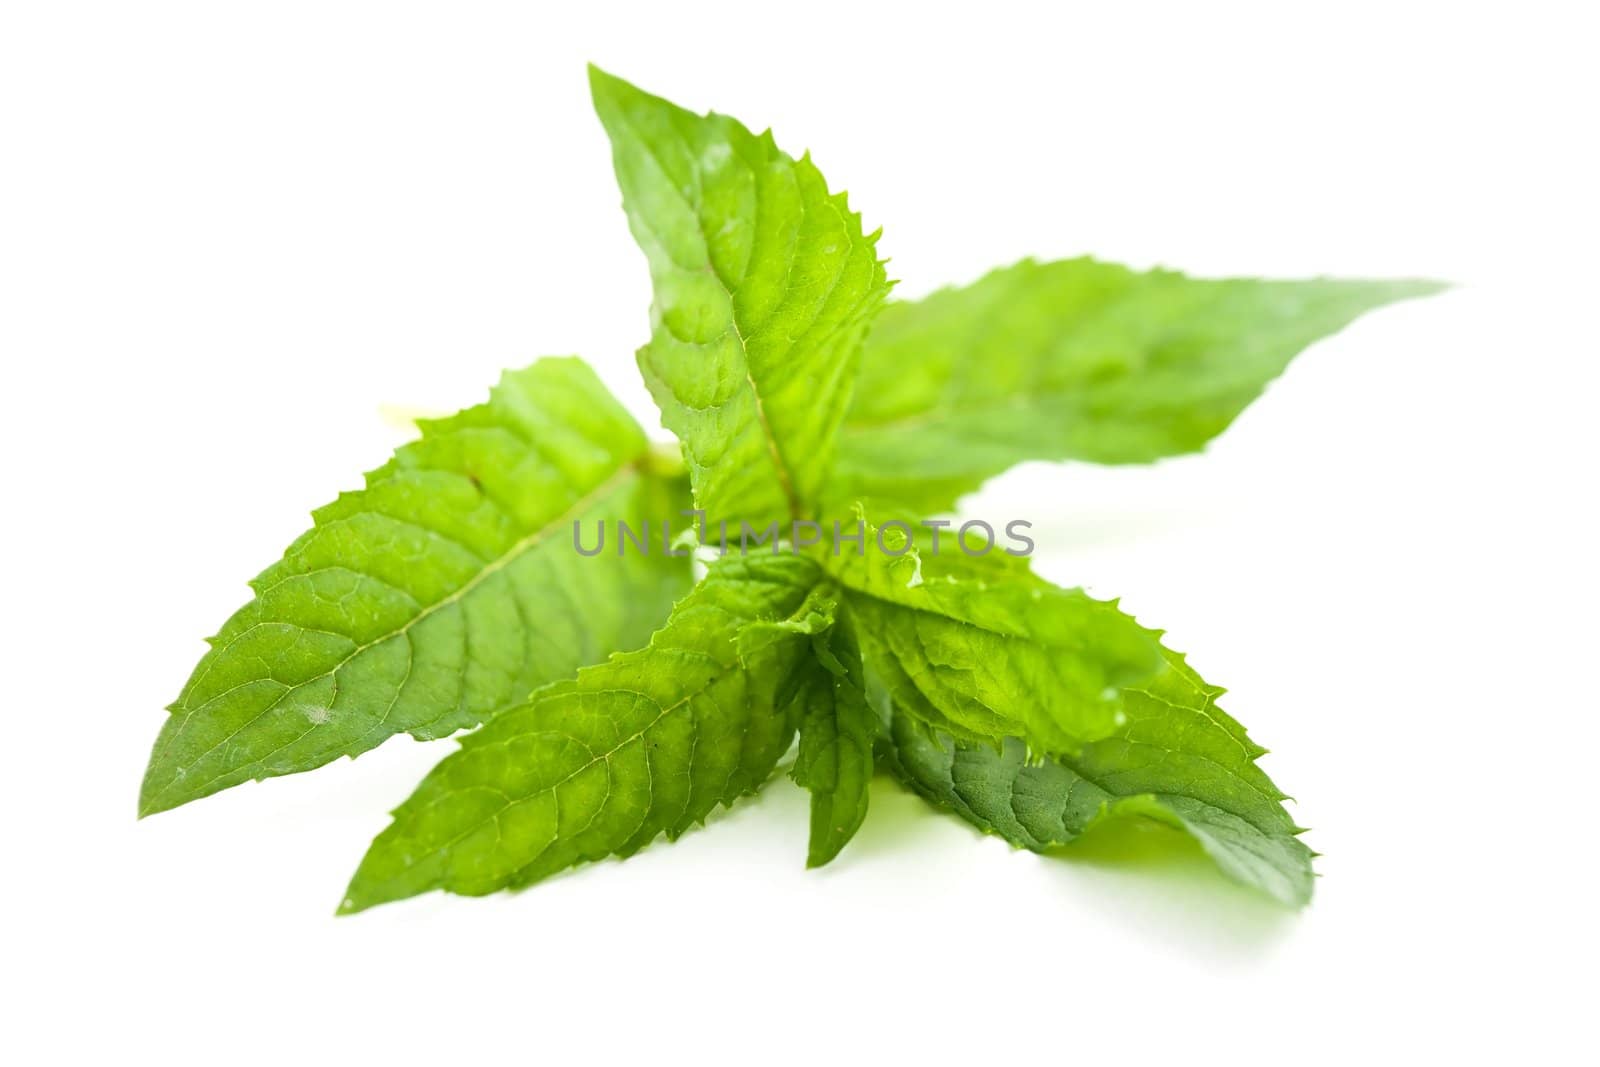 An image of a little twig of green mint